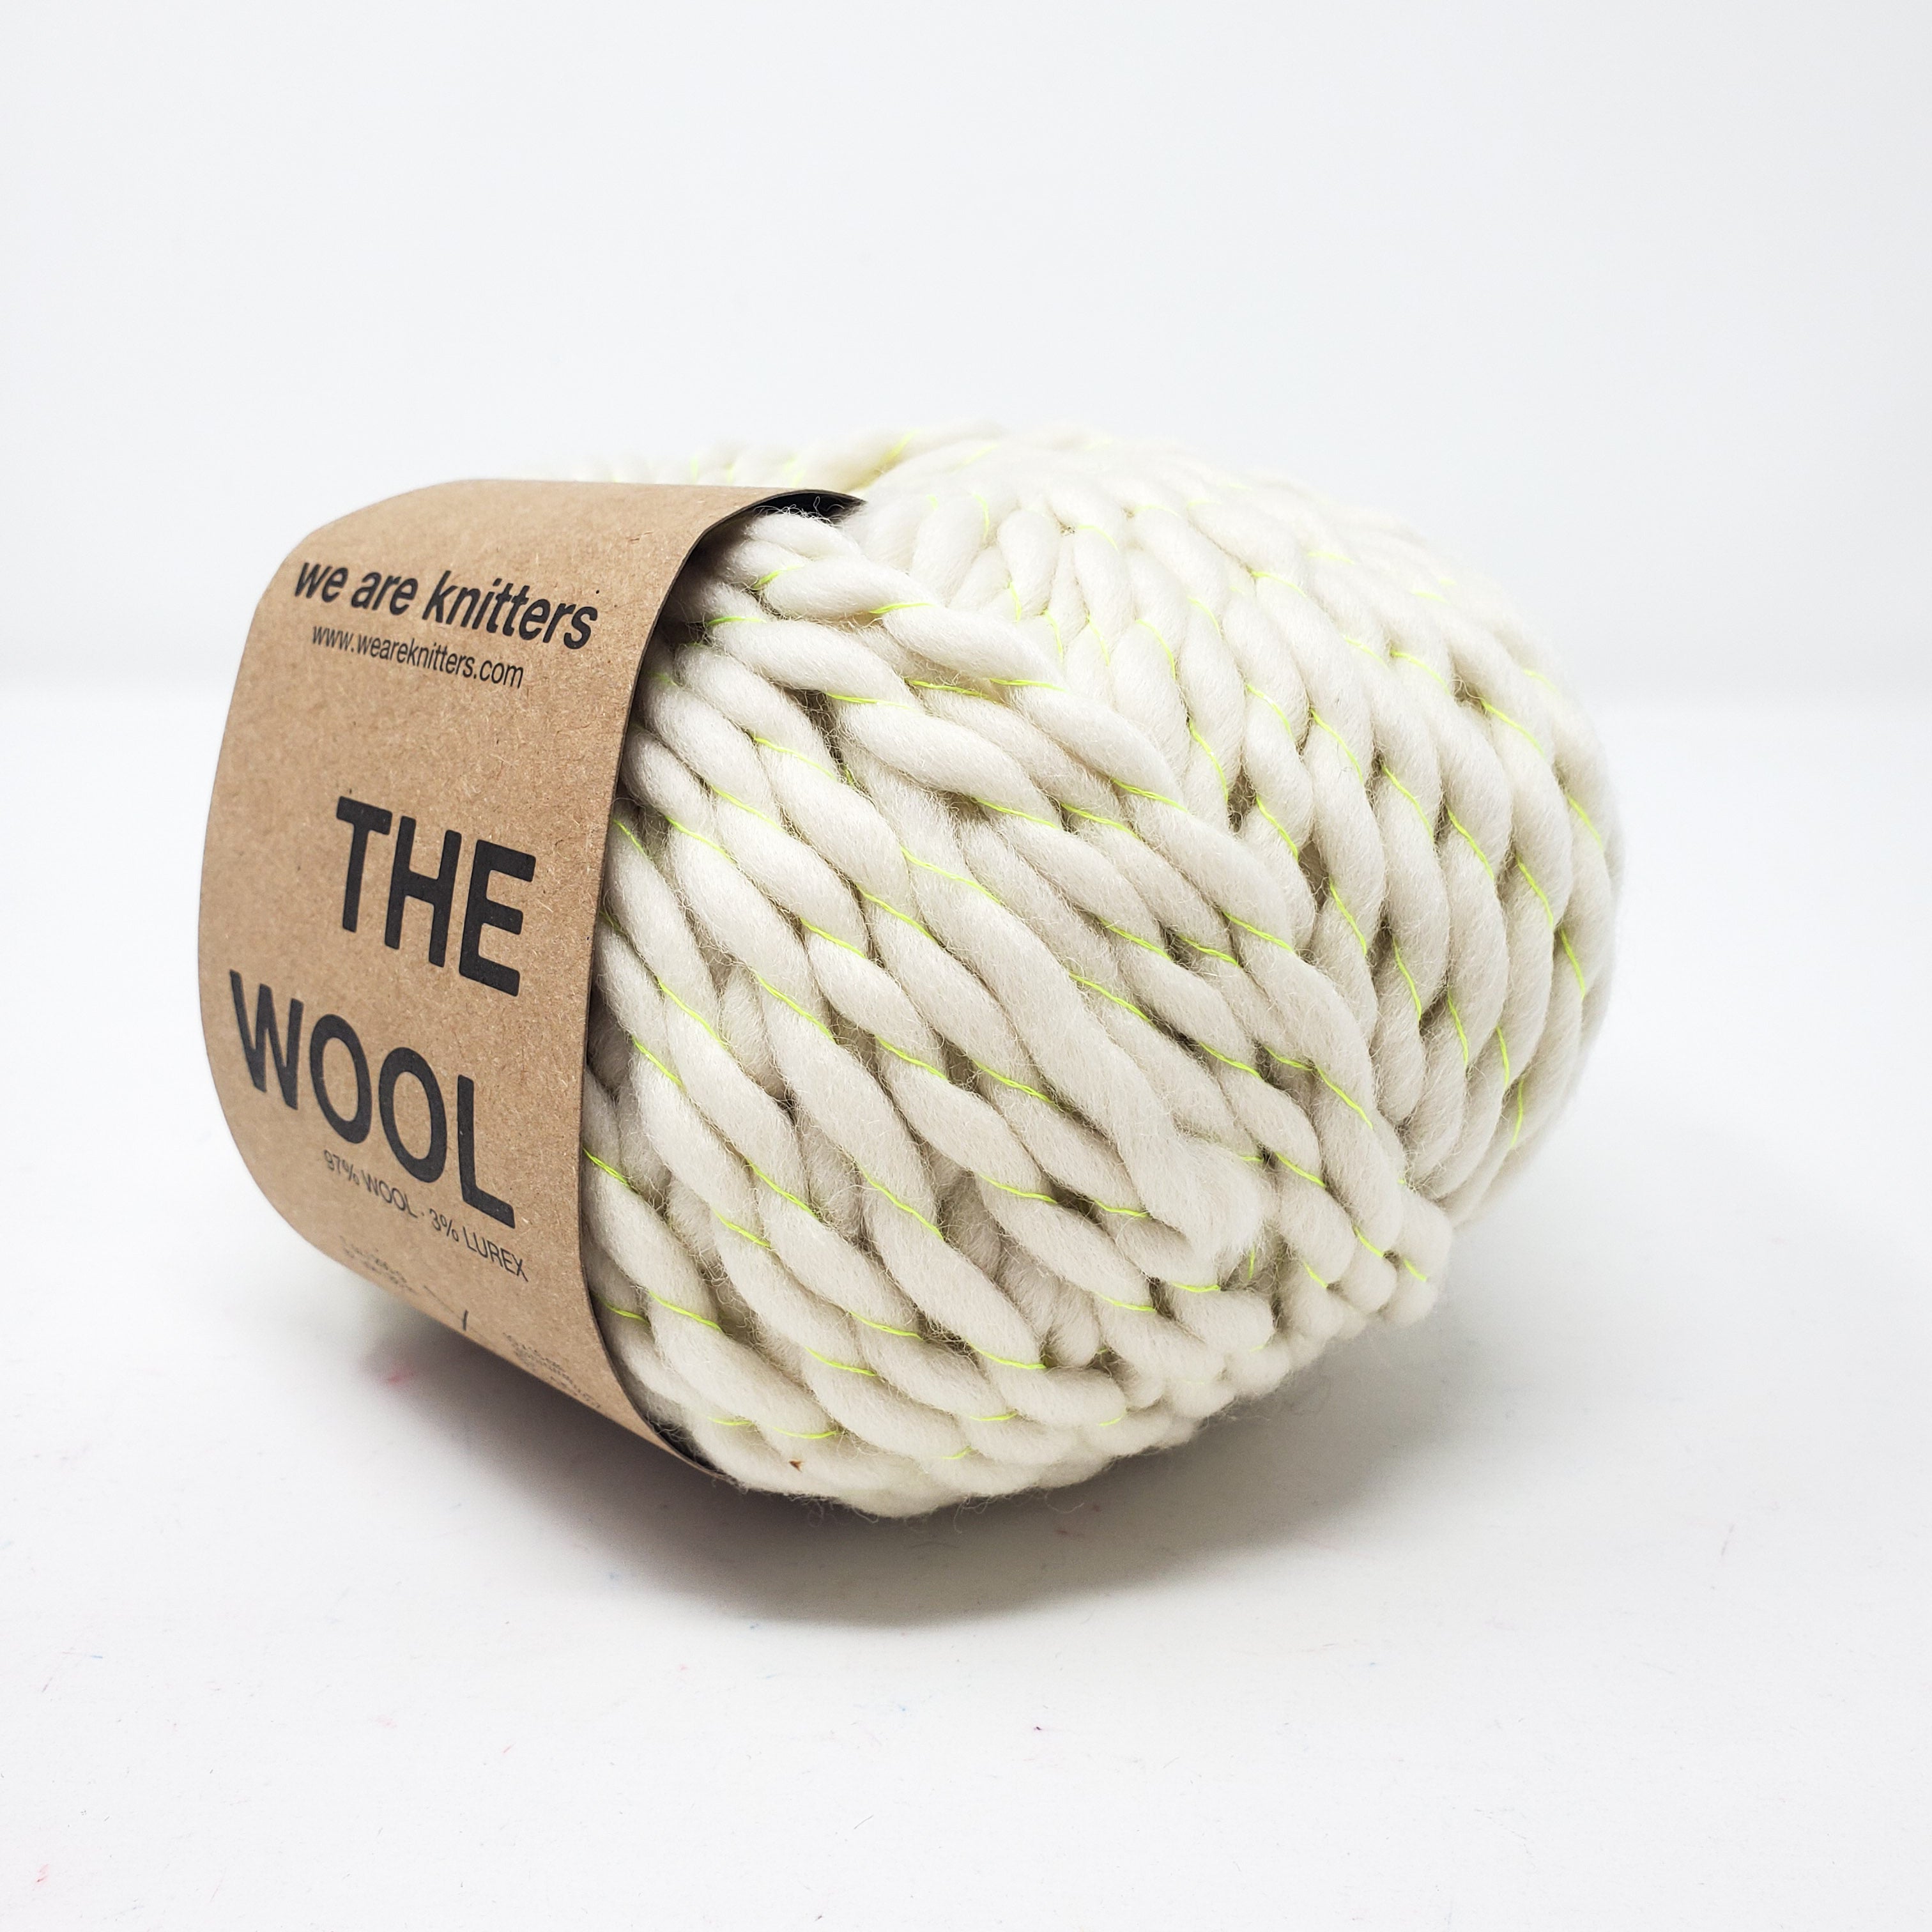 Sparkling Natural - The Wool - 0